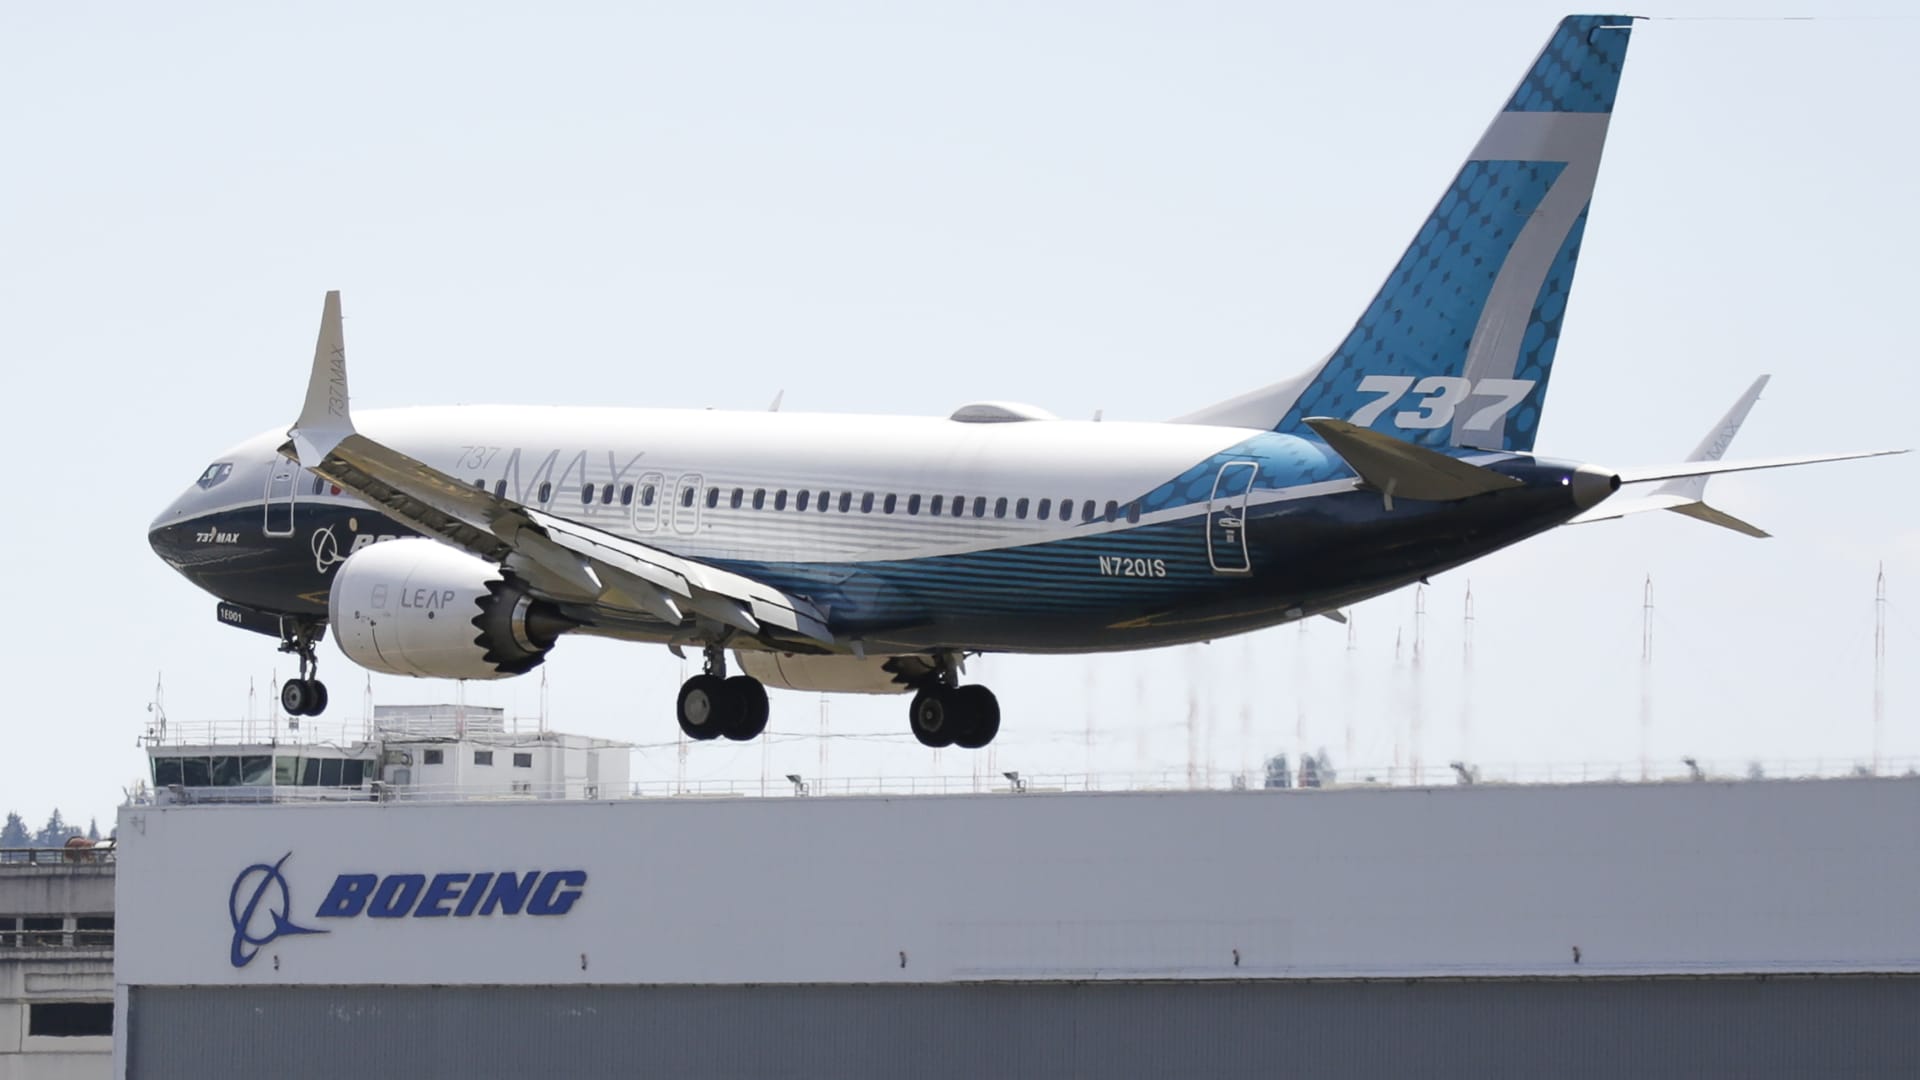 A Boeing 737 MAX jet lands following a Federal Aviation Administration (FAA) test flight at Boeing Field in Seattle, Washington on June 29, 2020.